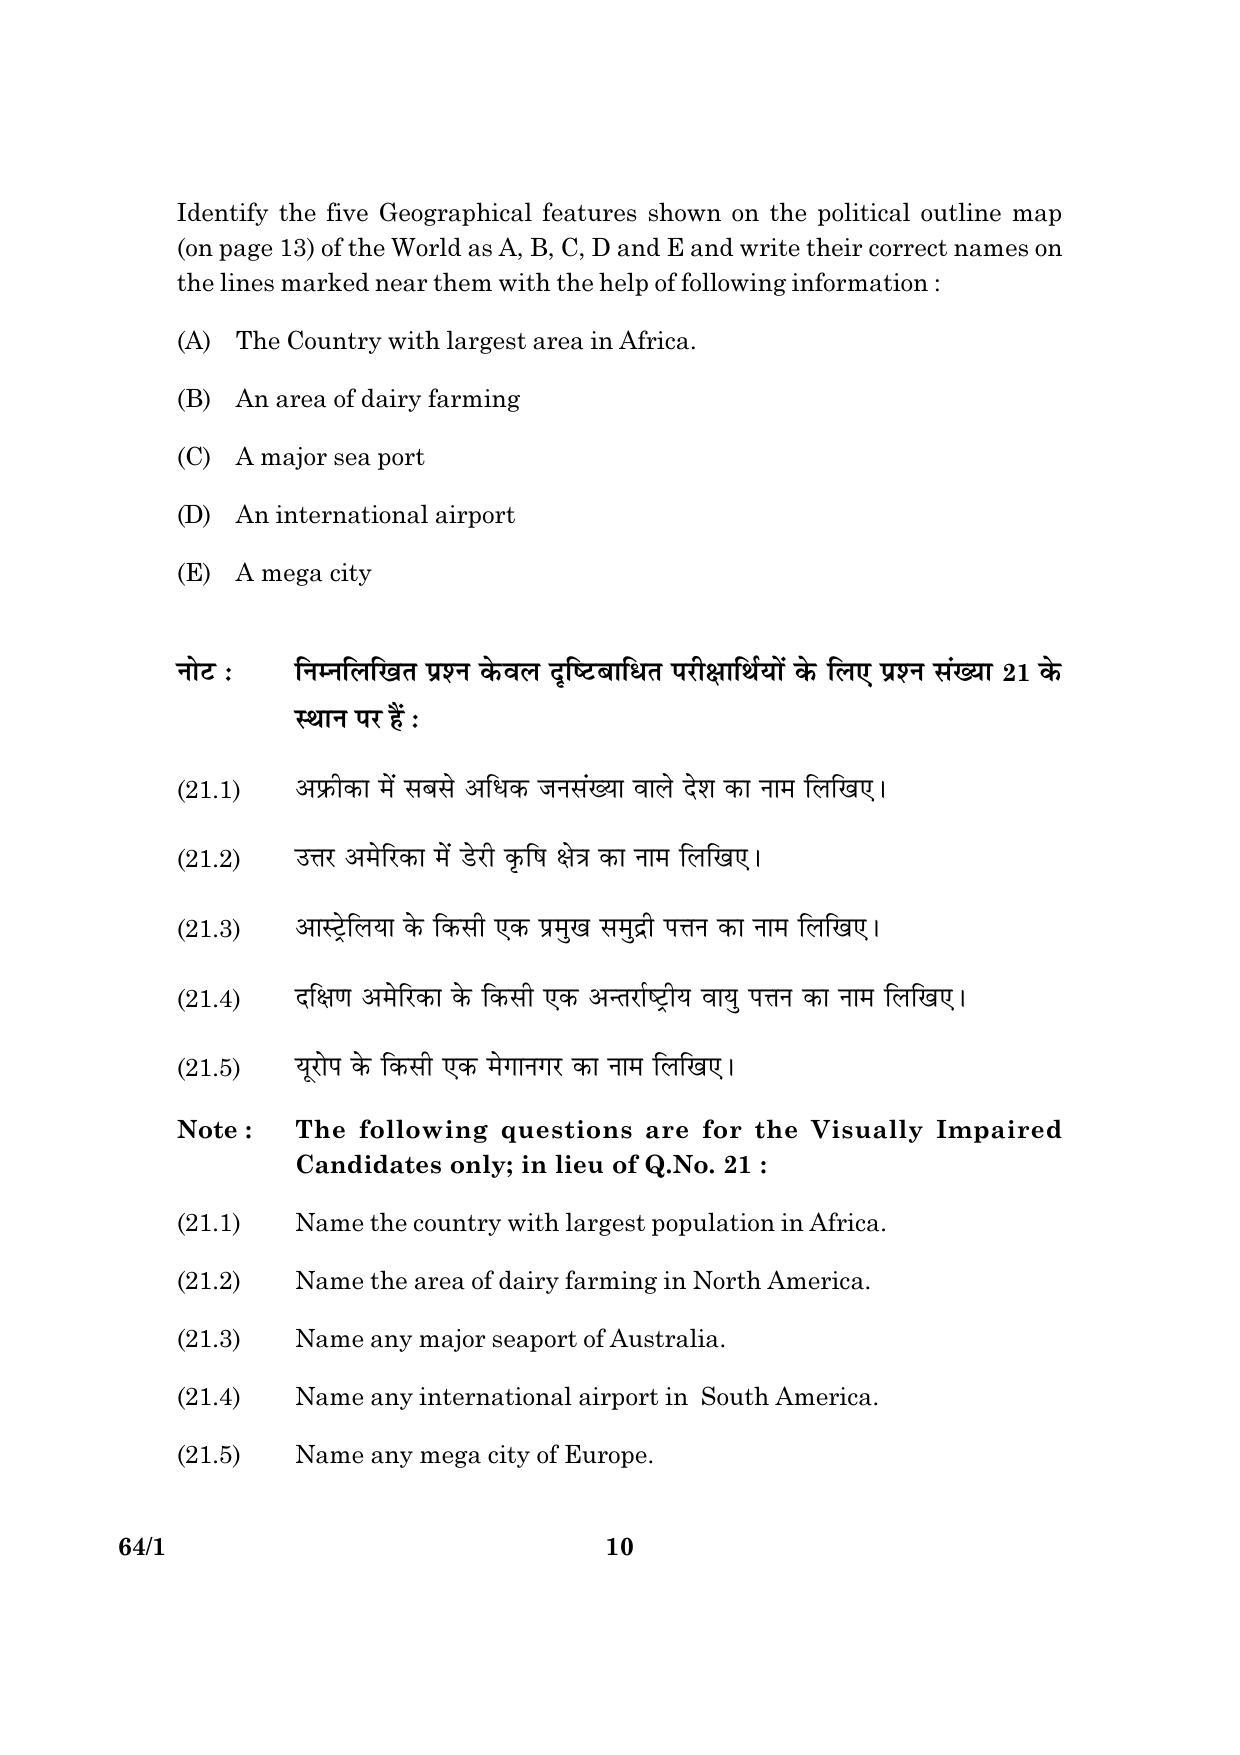 CBSE Class 12 064 Set 1 Geography 2016 Question Paper - Page 10